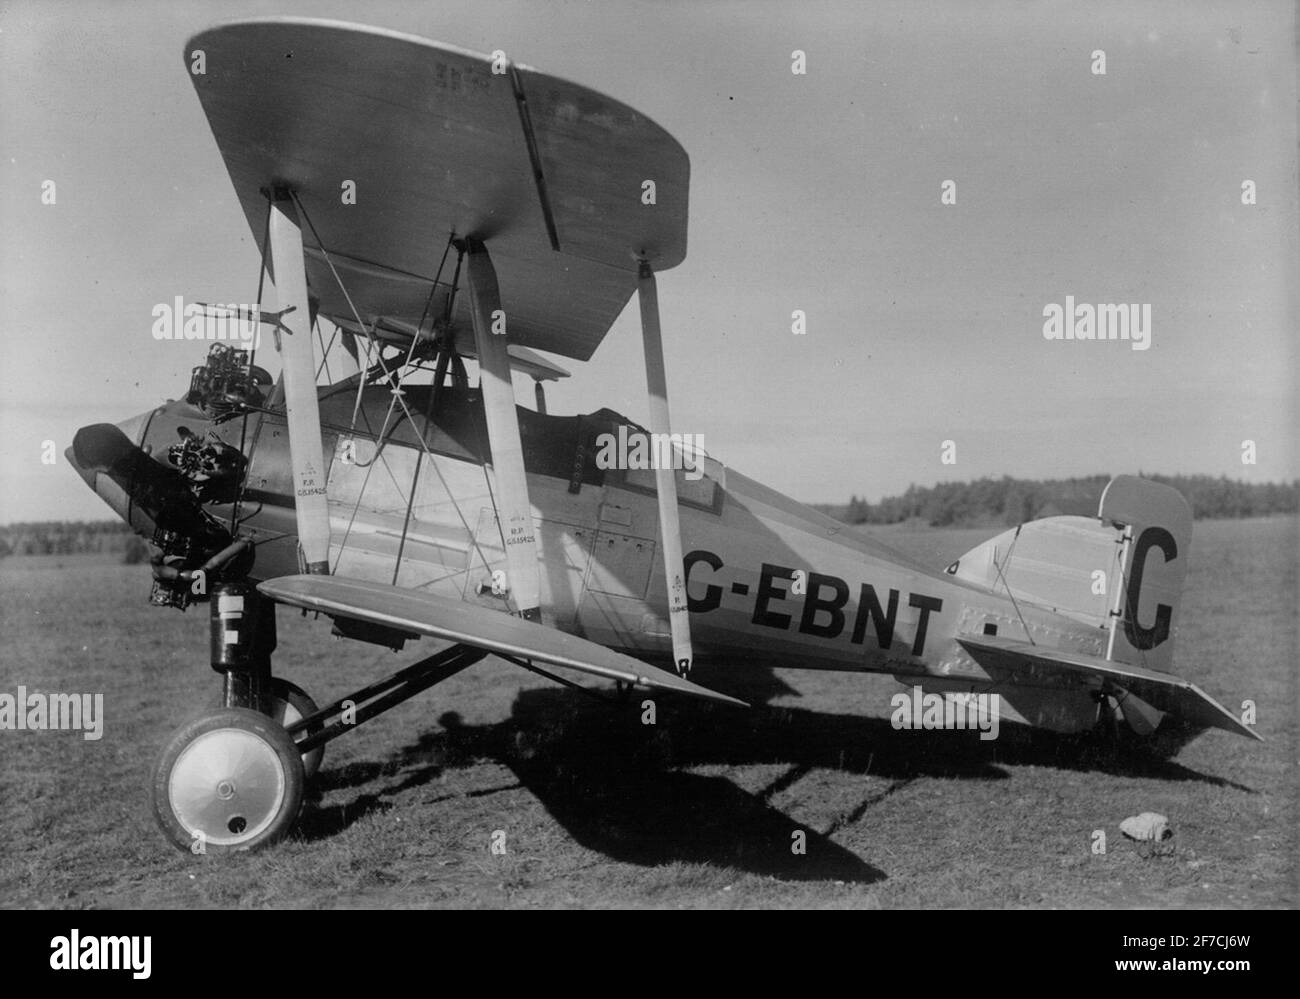 Gloster Gamecock on an airfield, about 1925 motif: British airplane Gloster Gamecock with registration G-EBNT on an airfield around 1925. View from the side. Stock Photo